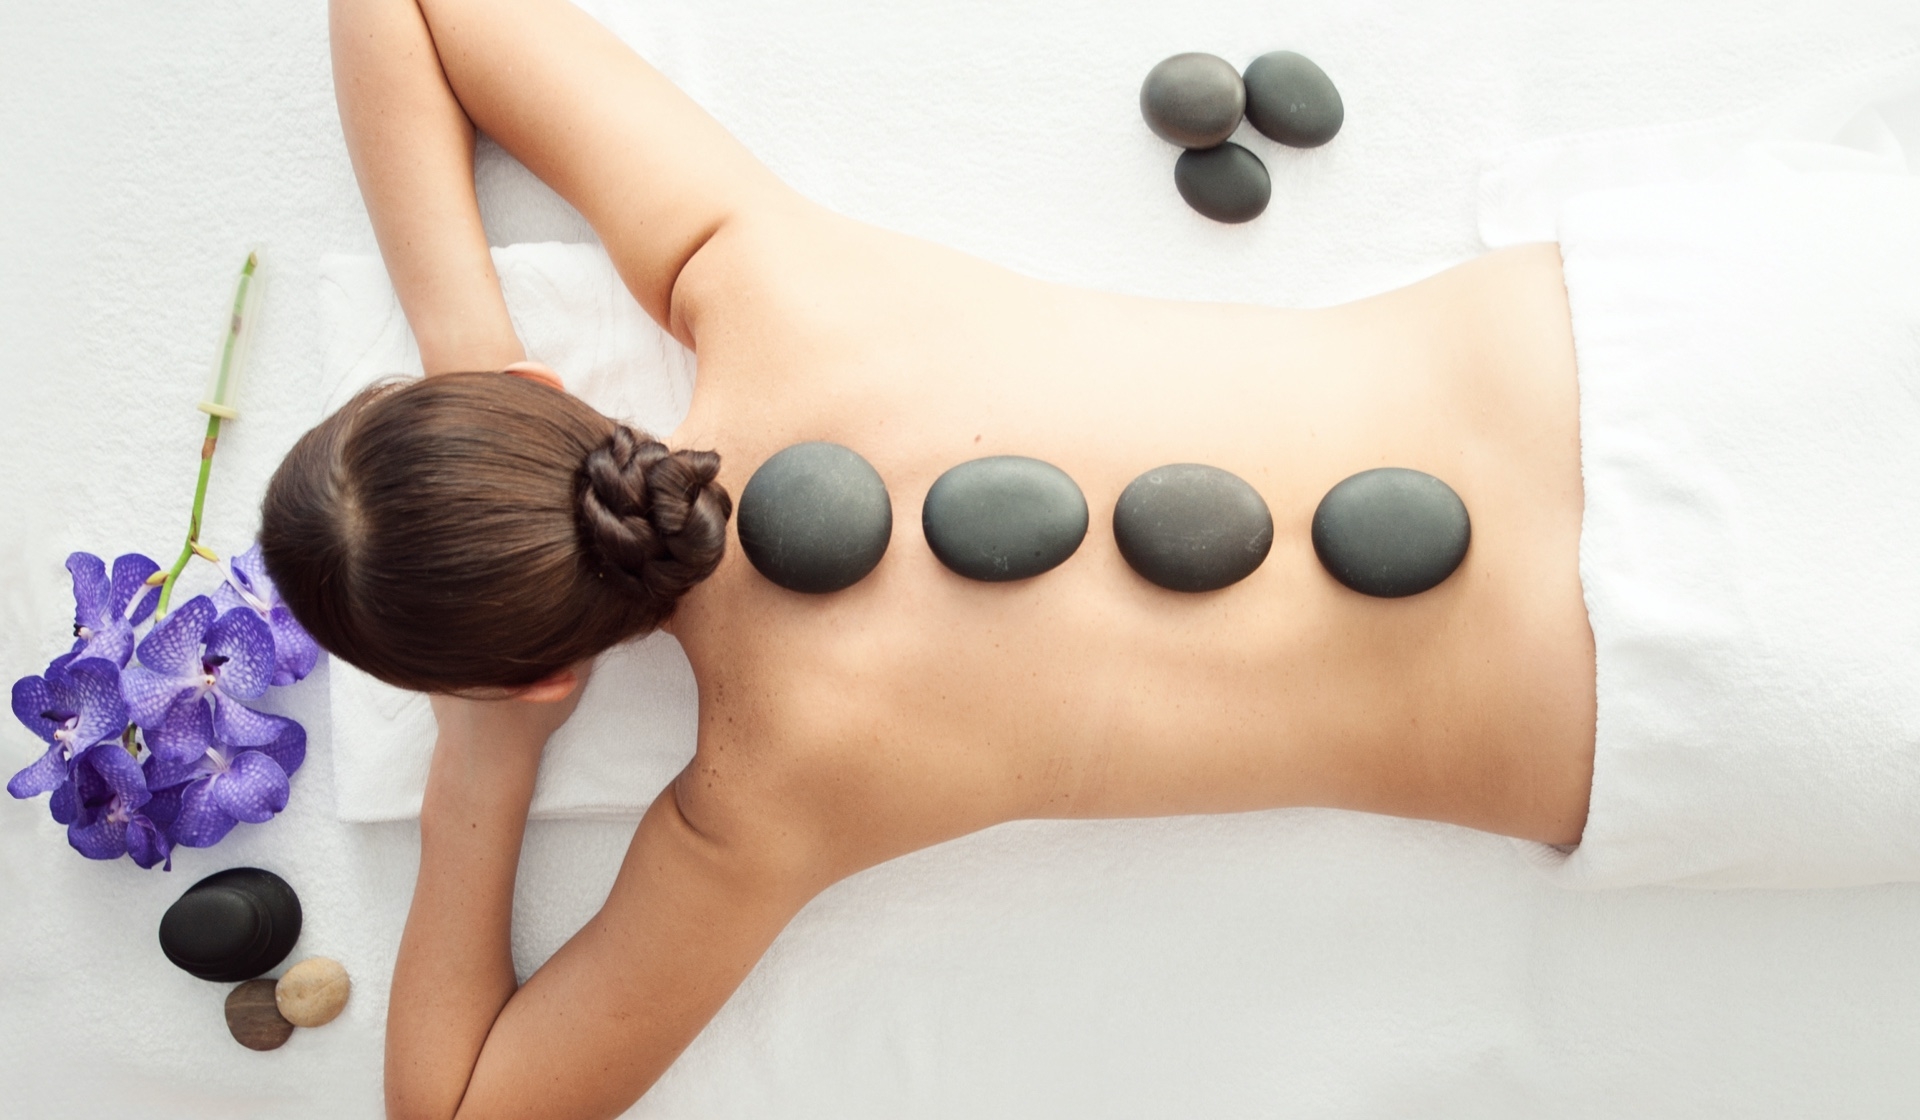 8 Types of Massage: What’s the Difference?